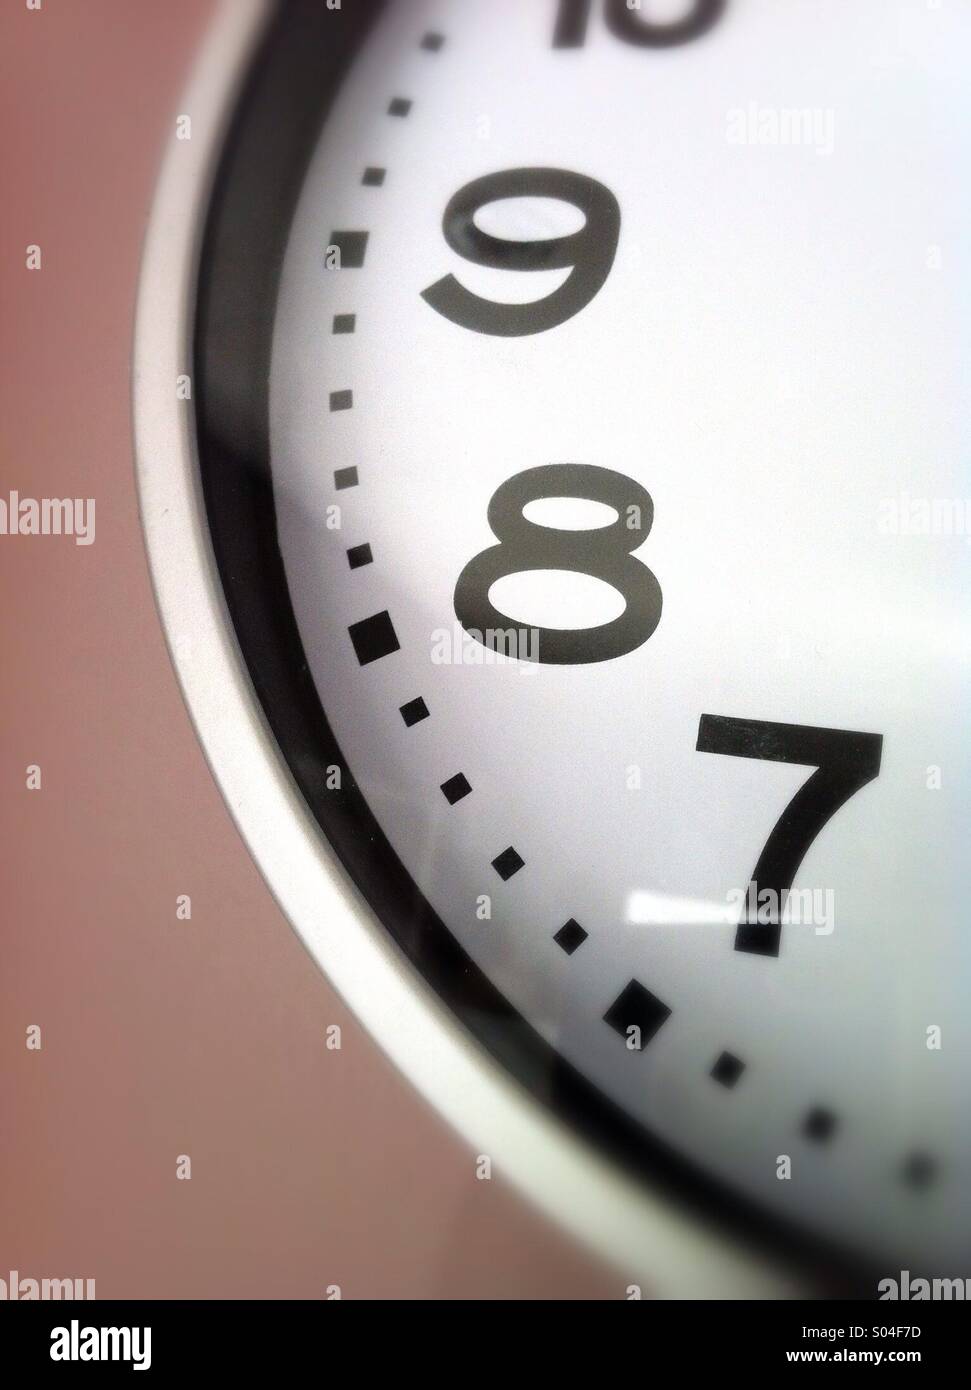 Numbers 7, 8, 9 on clock face Stock Photo